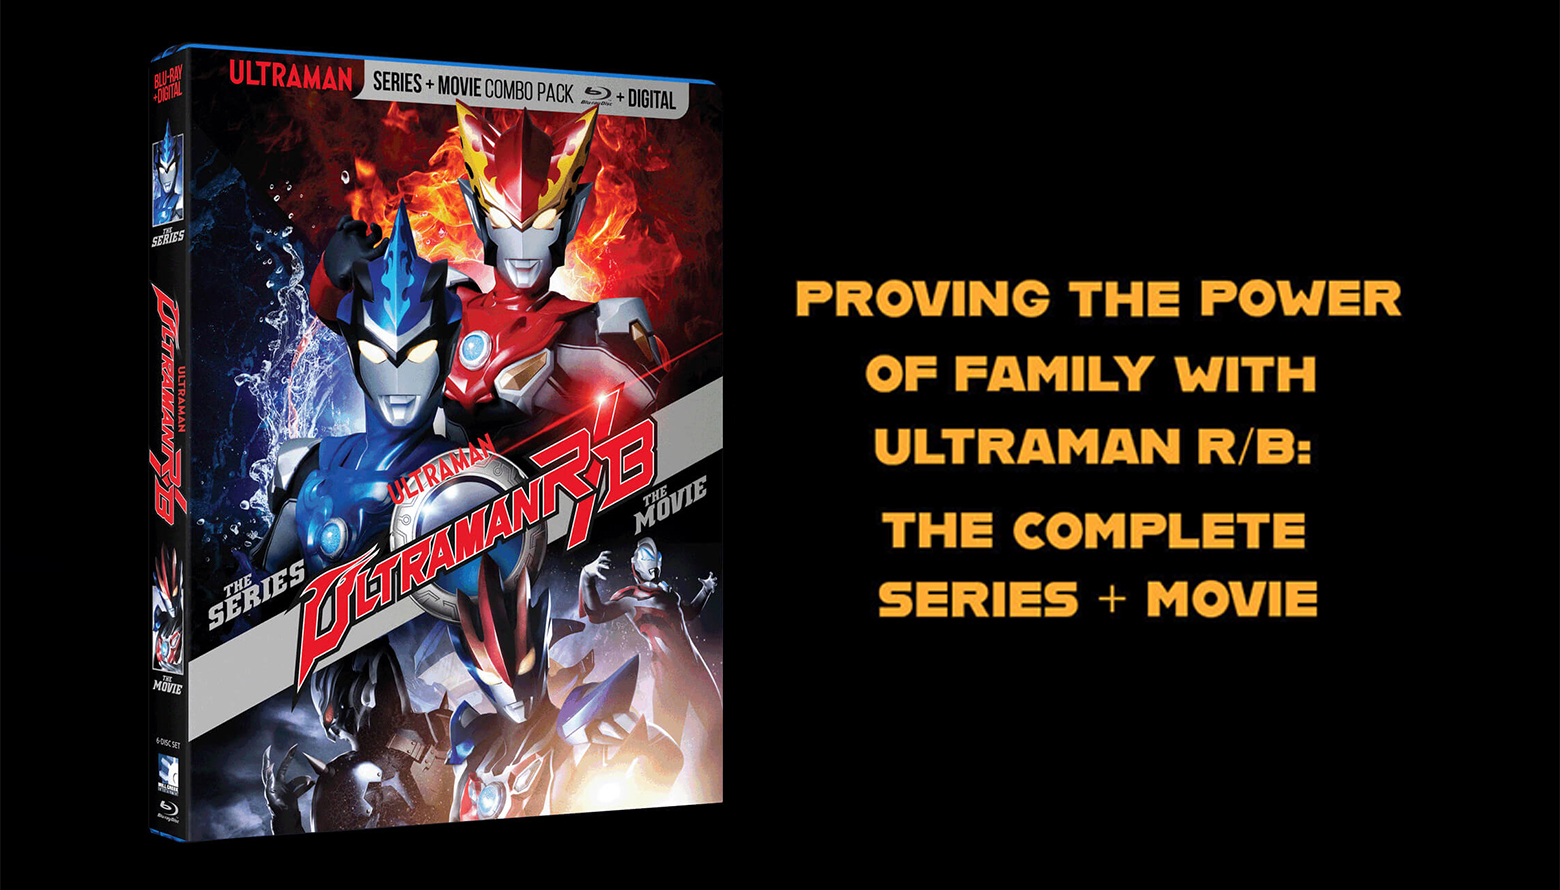 PROVING THE POWER OF FAMILY WITH  ULTRAMAN R/B:THE COMPLETE SERIES+MOVIE